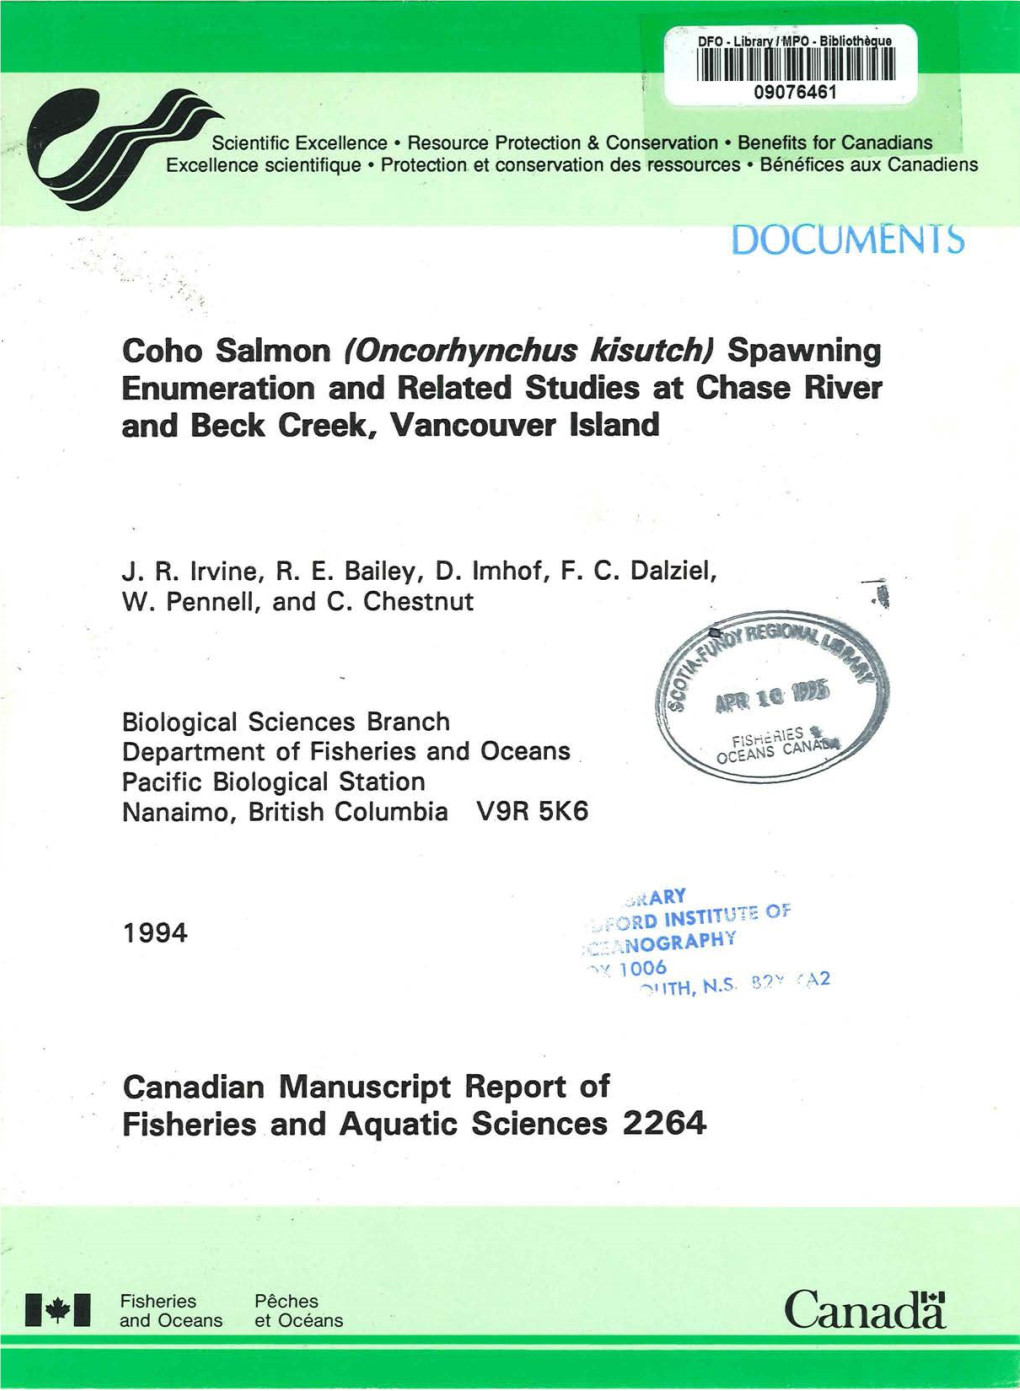 Coho Salmon (Oncorhynchus Kisutch) Spawning Enumeration and Related Studies at Chase River and Beck Creek, Vancouver Island